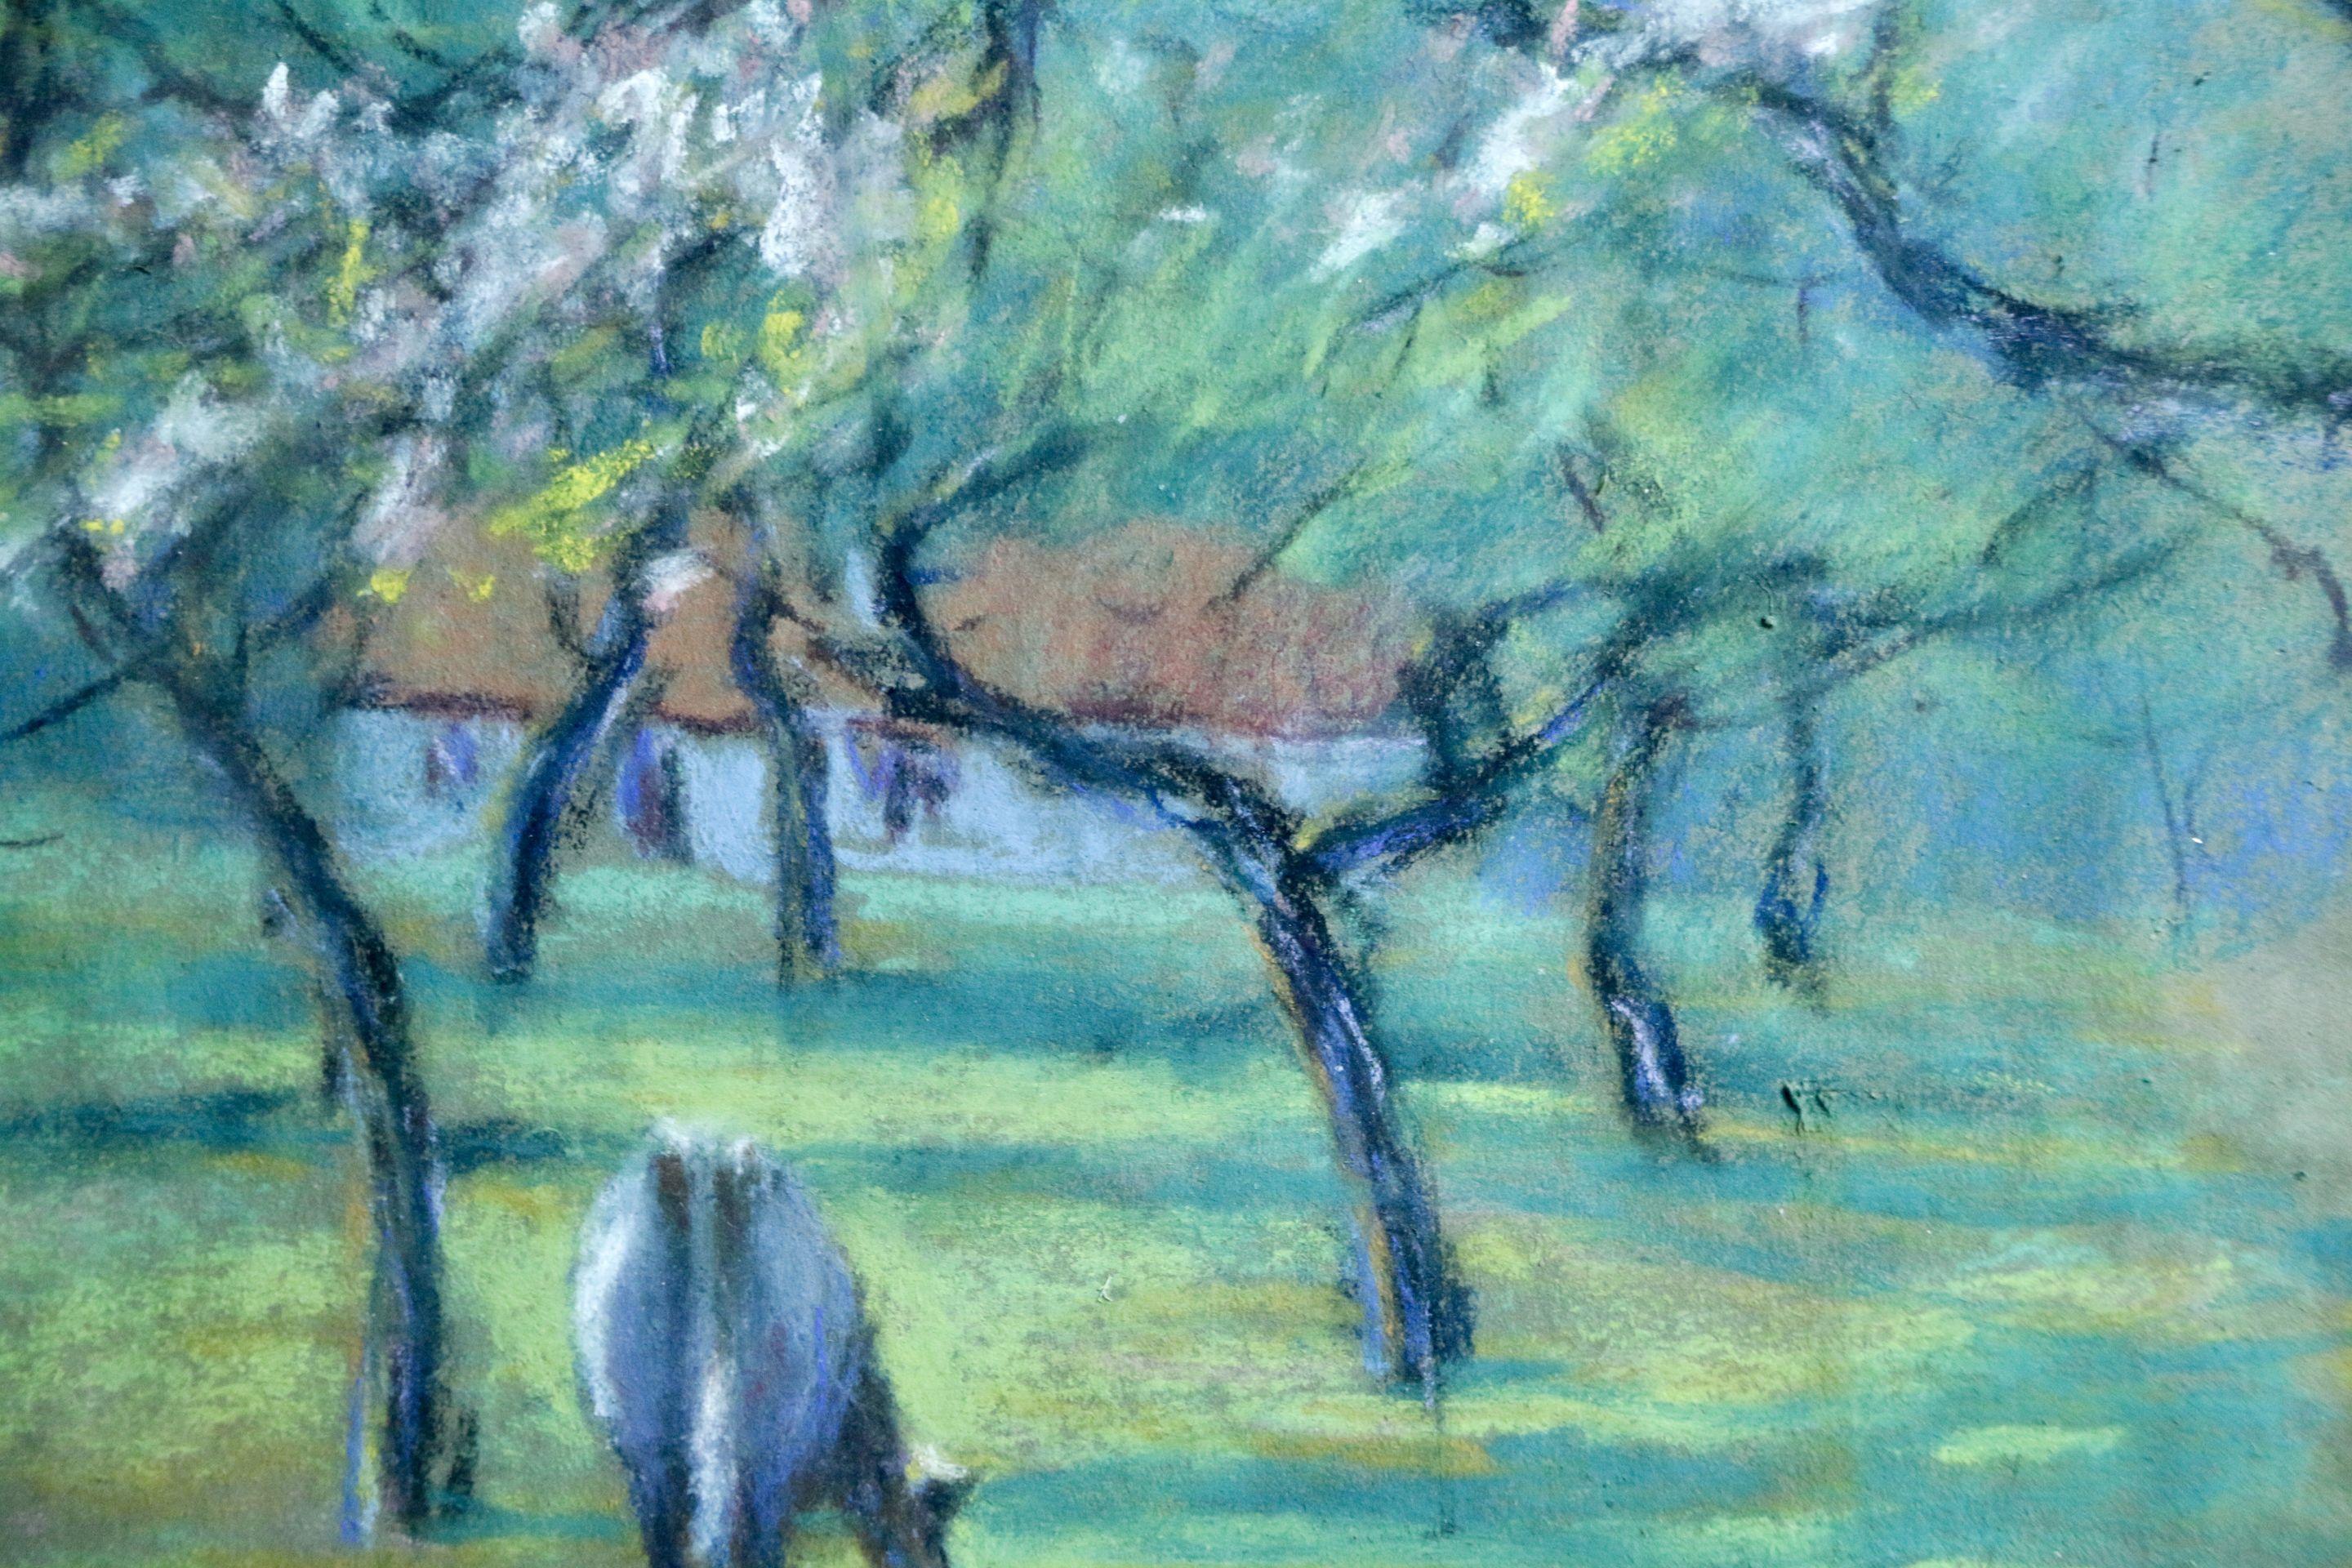 Cattle in an Orchard - 20th Century Pastel, Cow & Trees in Landscape by Dewhurst - Blue Landscape Art by Wynford Dewhurst